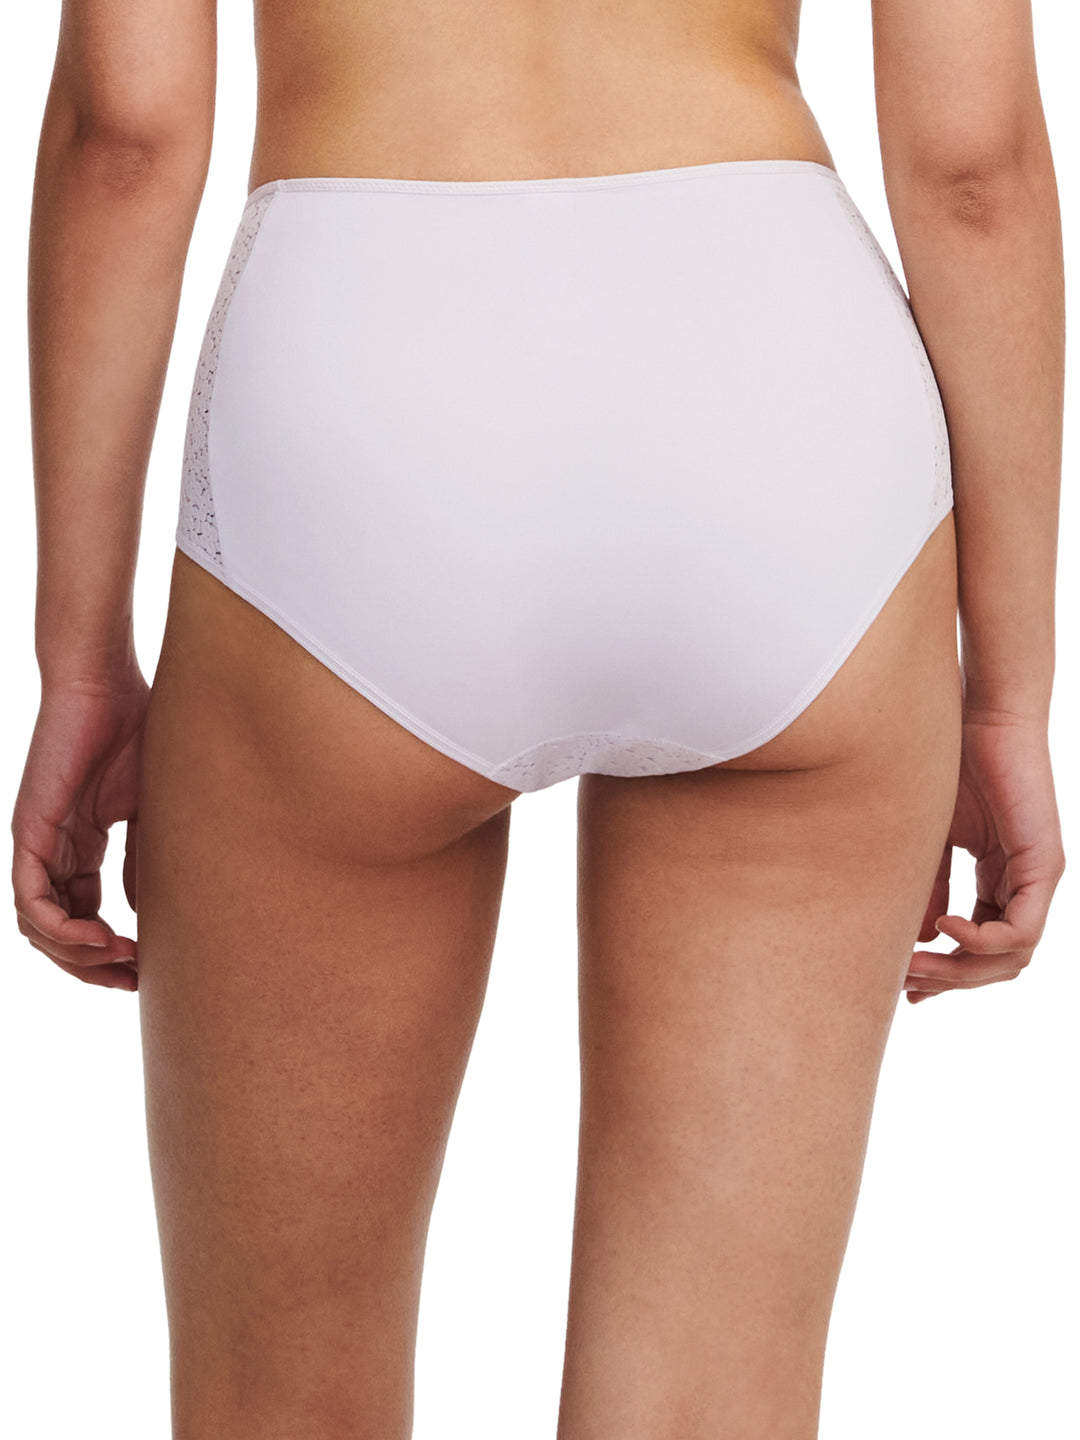 Chantelle Easyfeel - Norah High-Waisted Covering Full Brief Evening Haze